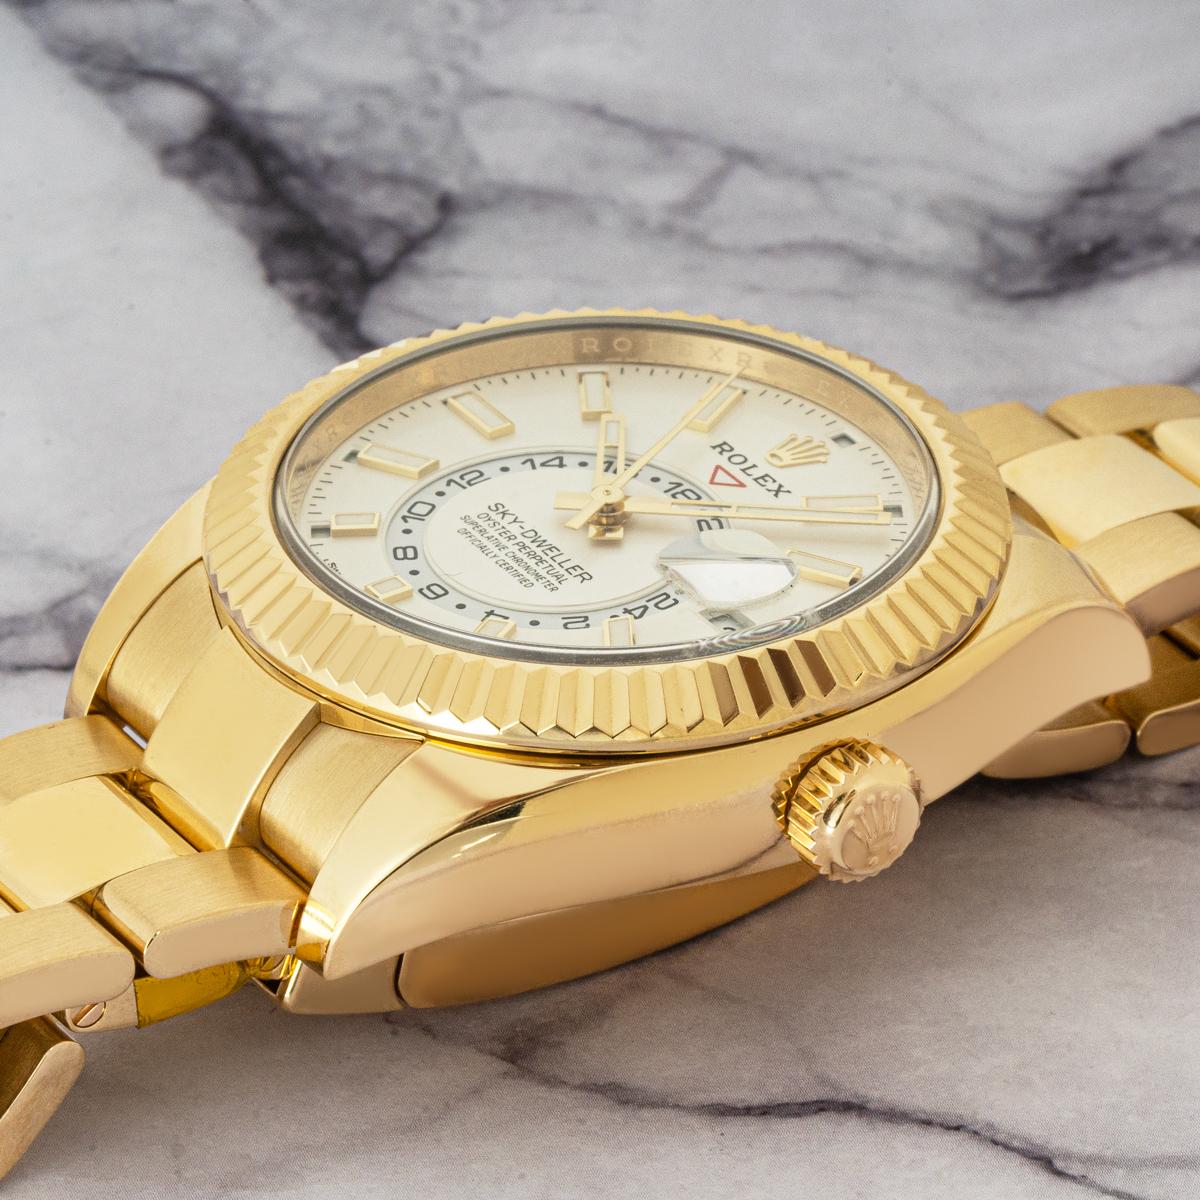 A yellow gold Sky-Dweller in yellow gold by Rolex. Featuring an intense white dial with the date, a month display via the 12 apertures, and a 24-hour display. The watch also features a second-time zone function, which can be set using the signature